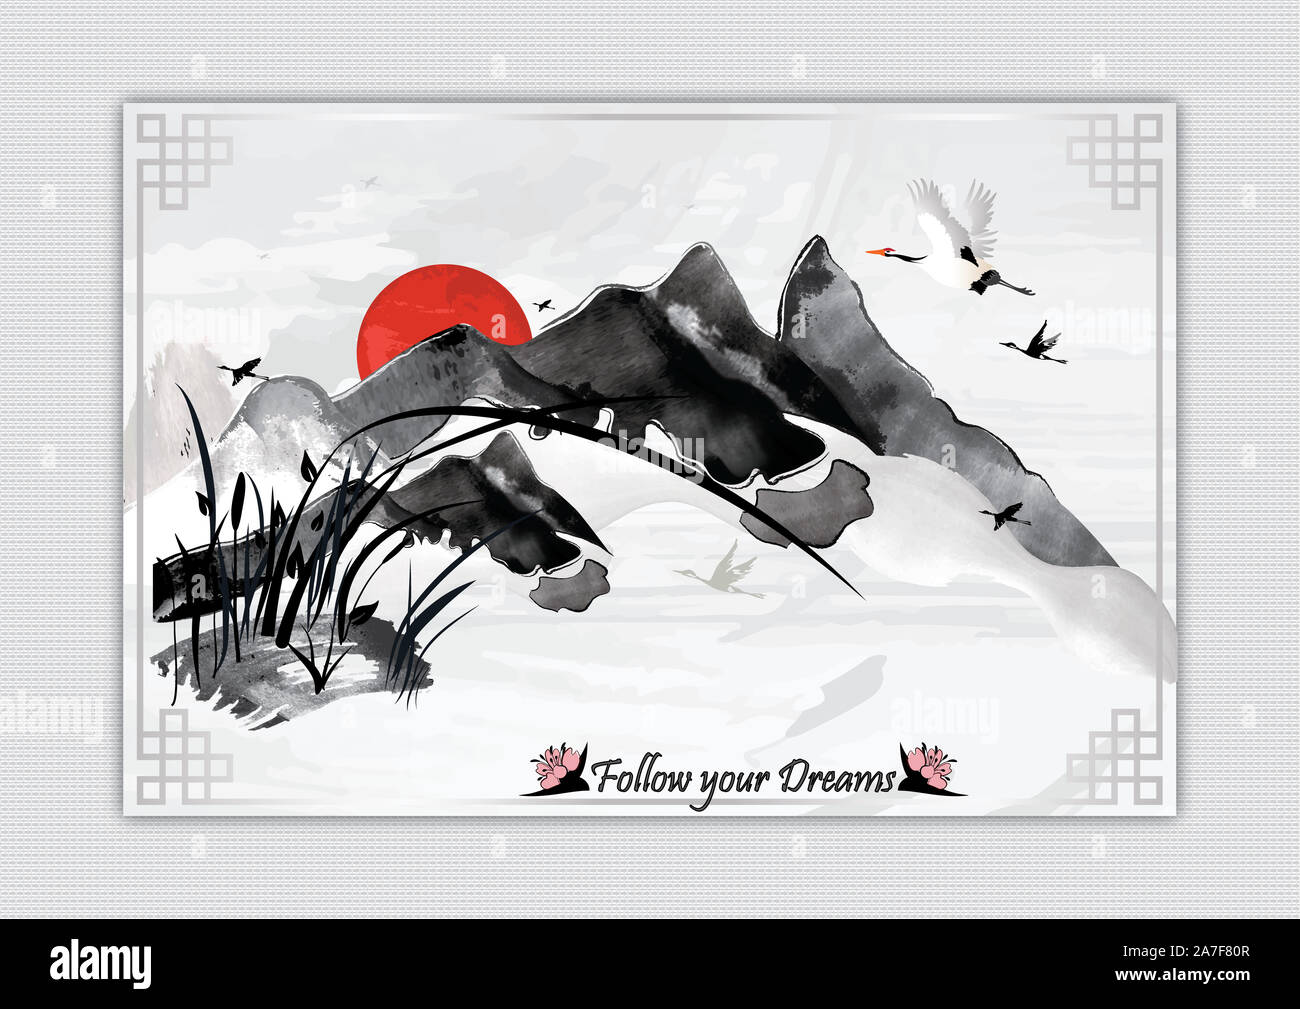 Chinese / Japanese / Korean style black ink painting, with a short motivational text written in English - 'Follow your dreams'. Stock Photo